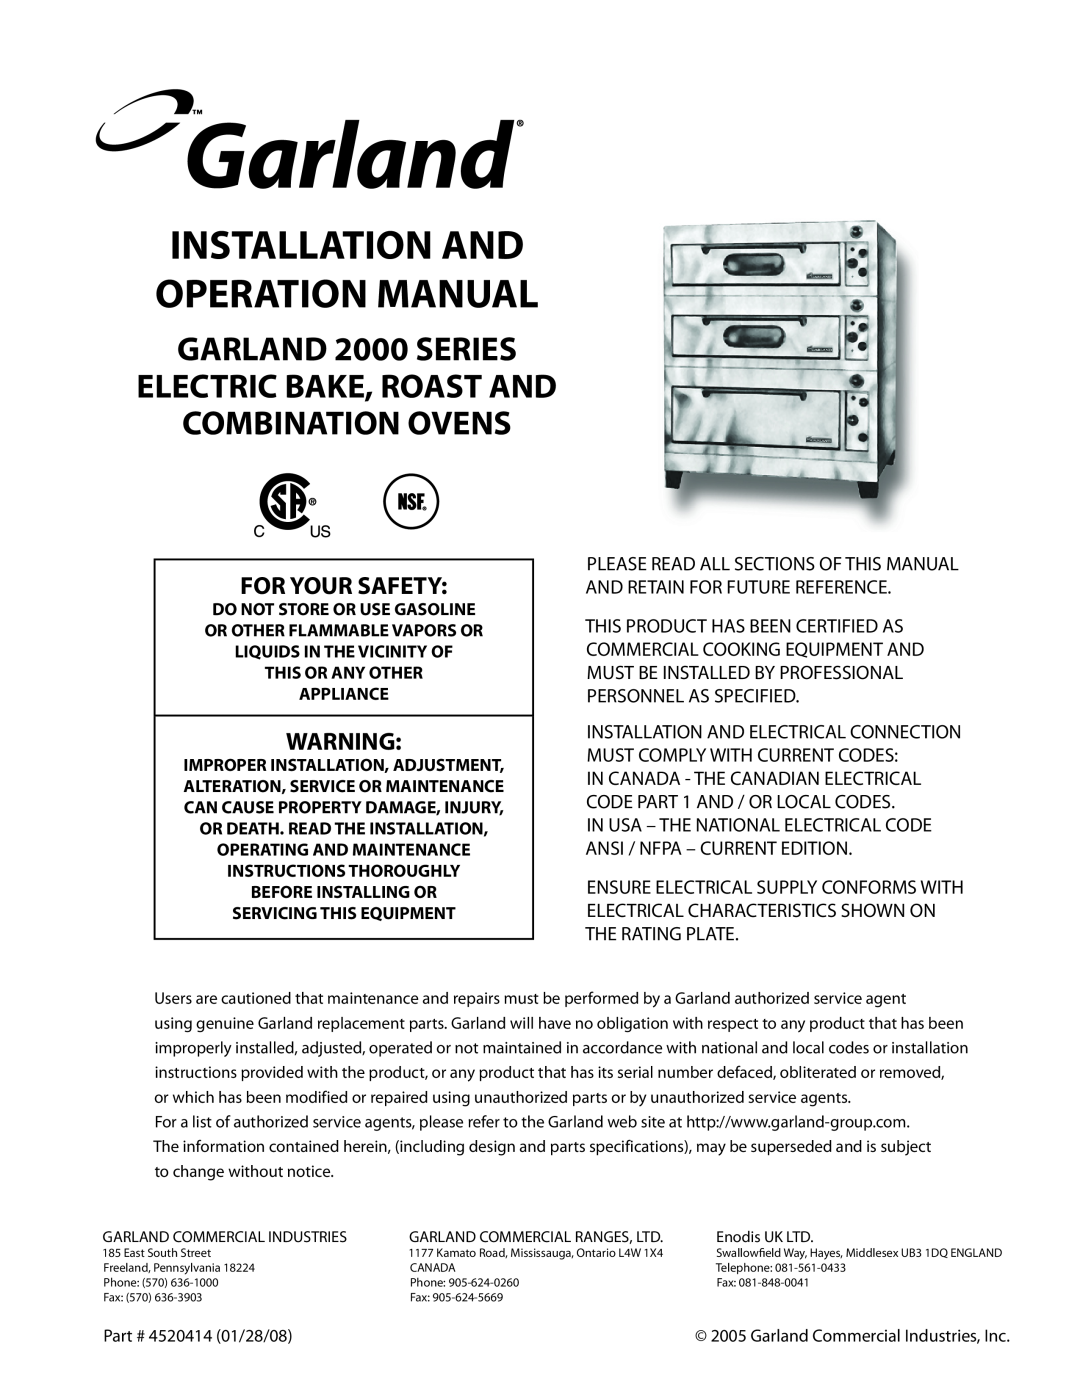 Garland operation manual For Your Safety, GARLAND 2000 SERIES ELECTRIC BAKE, ROAST AND, Combination Ovens 